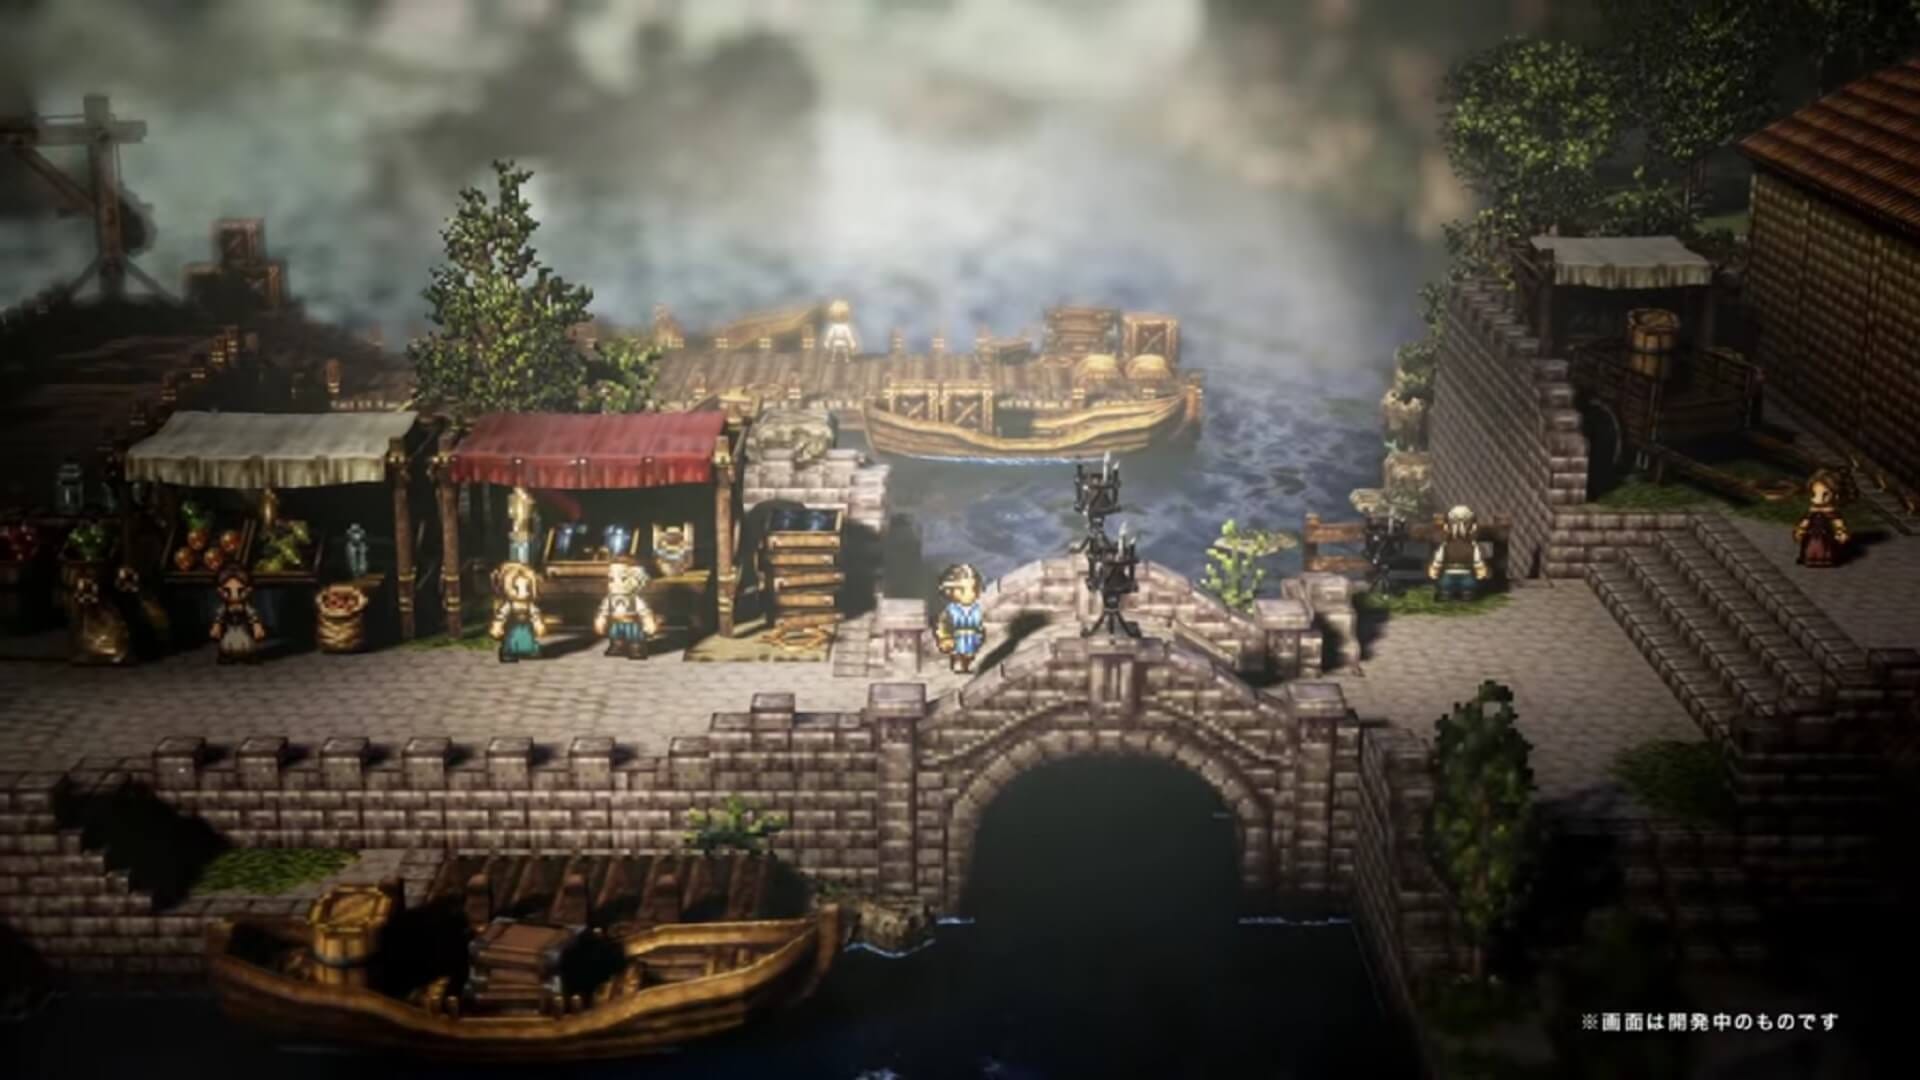 Octopath Traveler (Square Enix) - Official Launch Gameplay